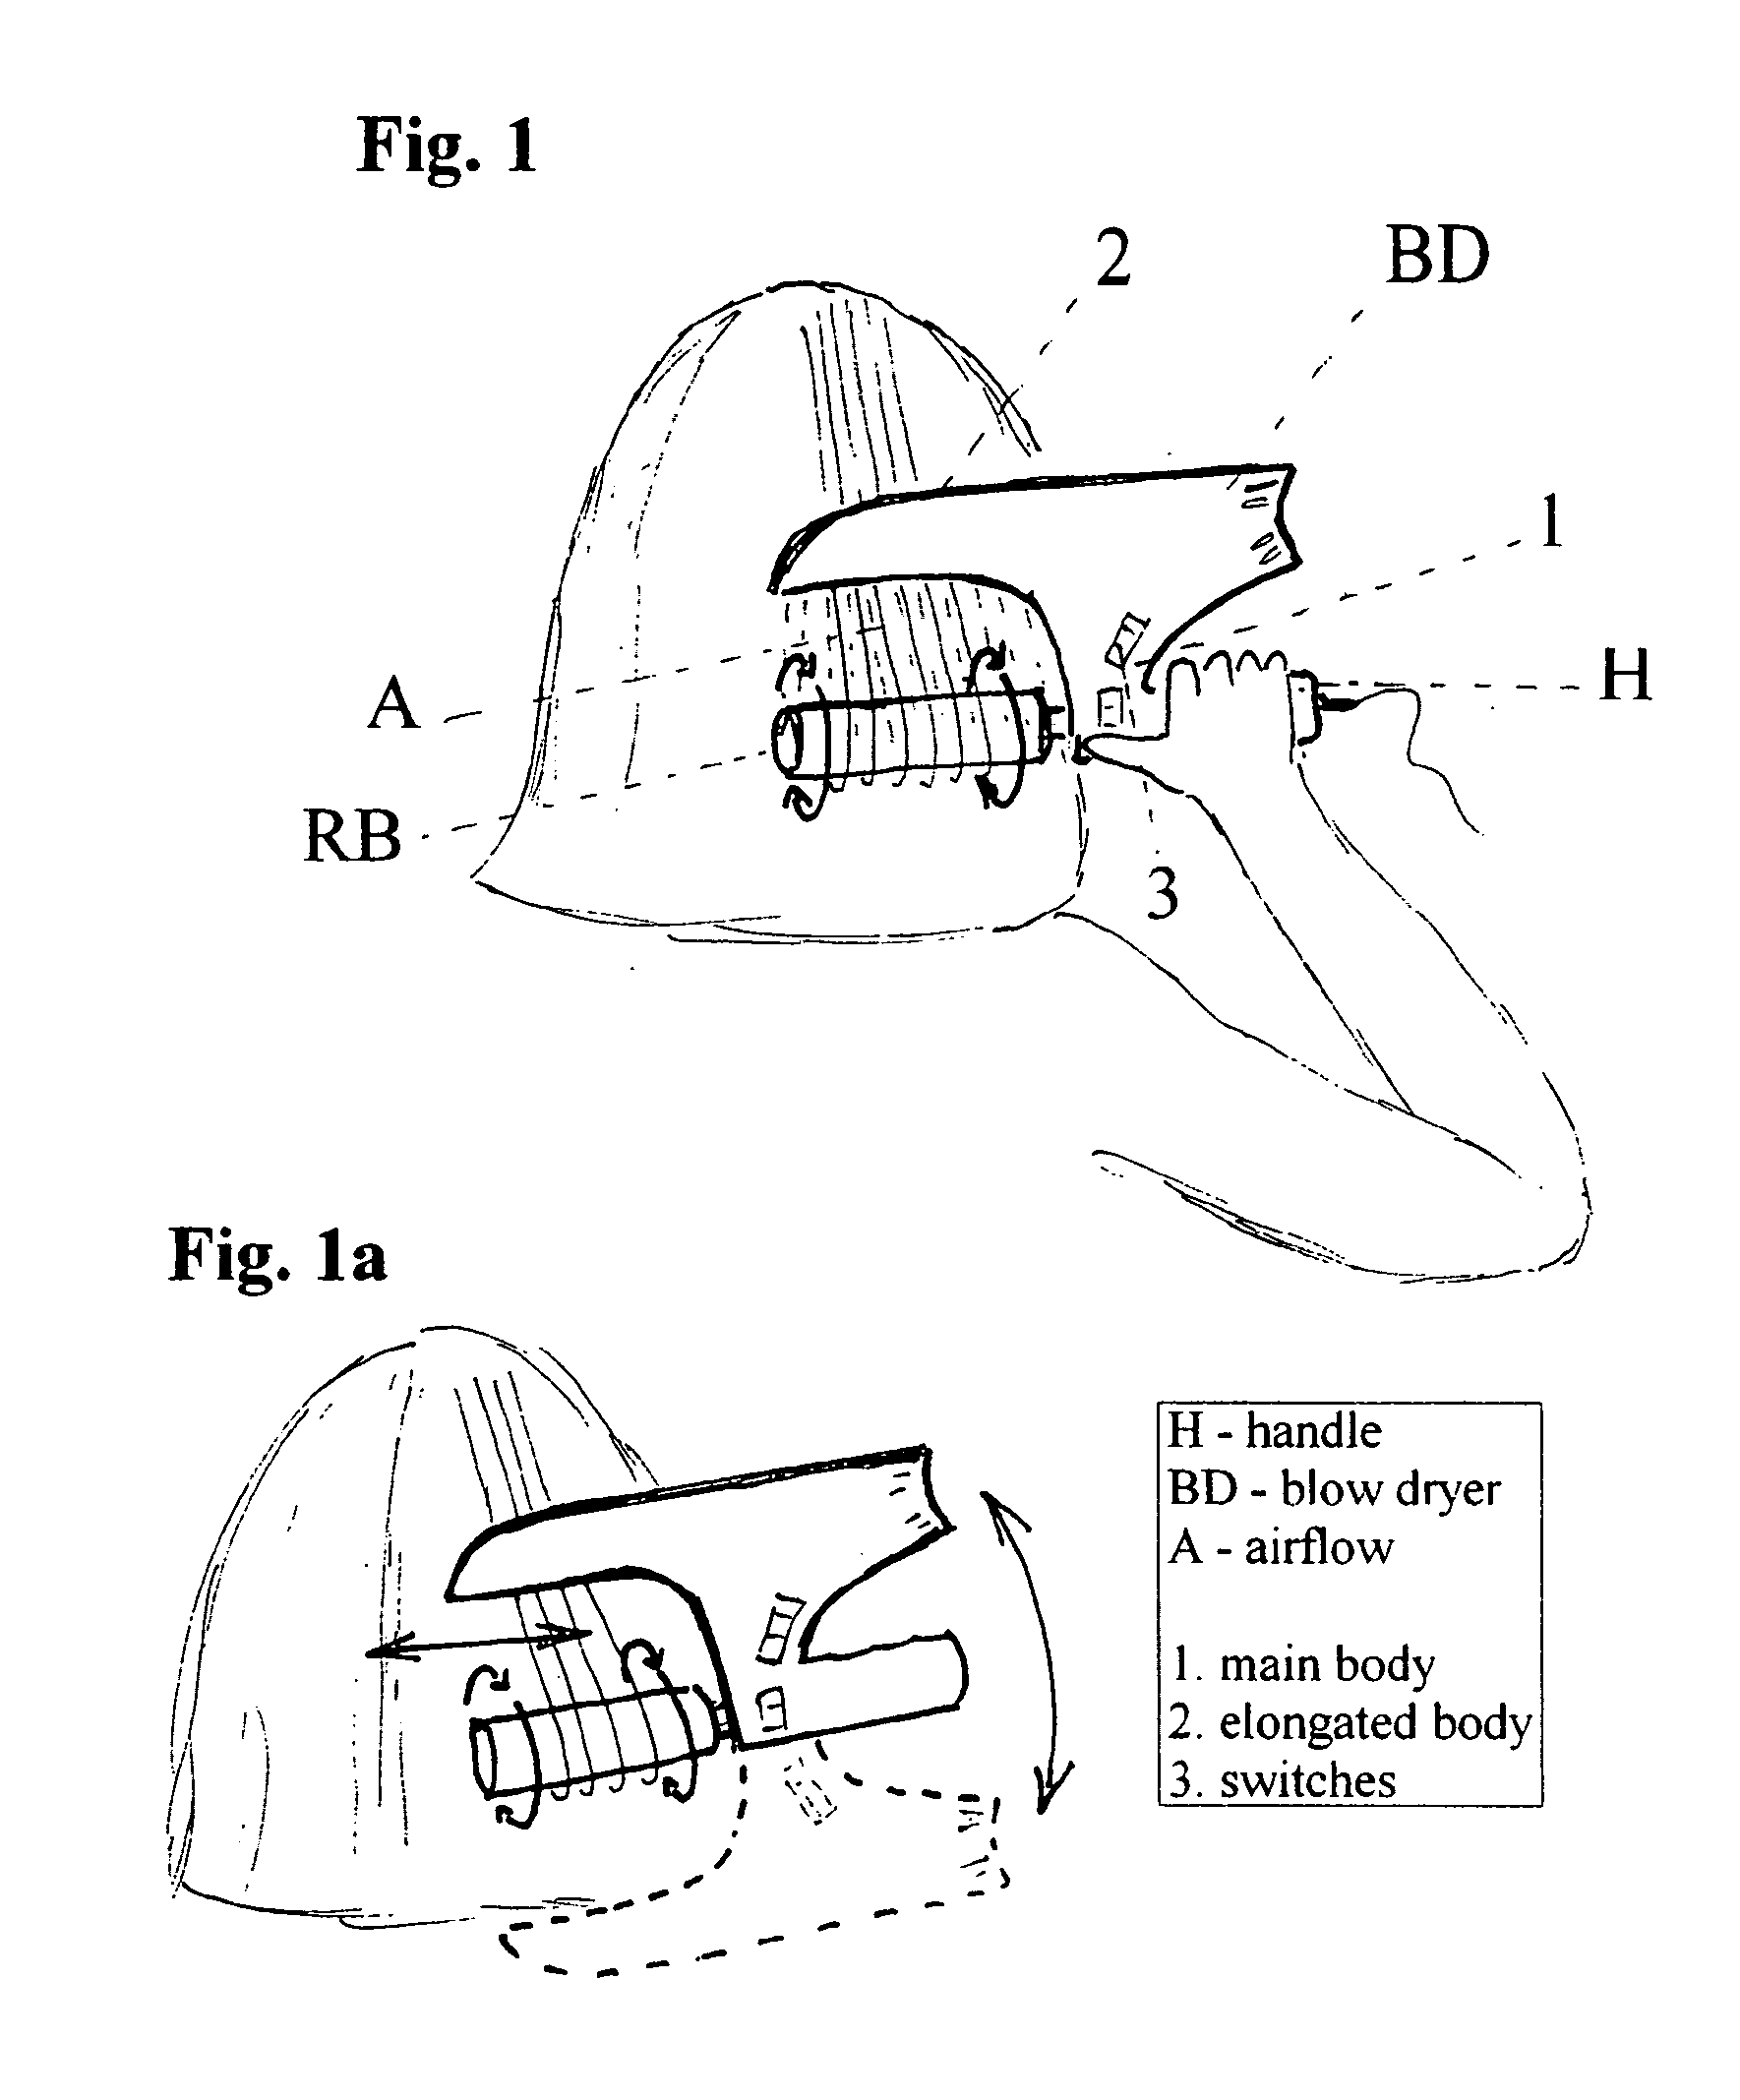 Hair drying/styling device